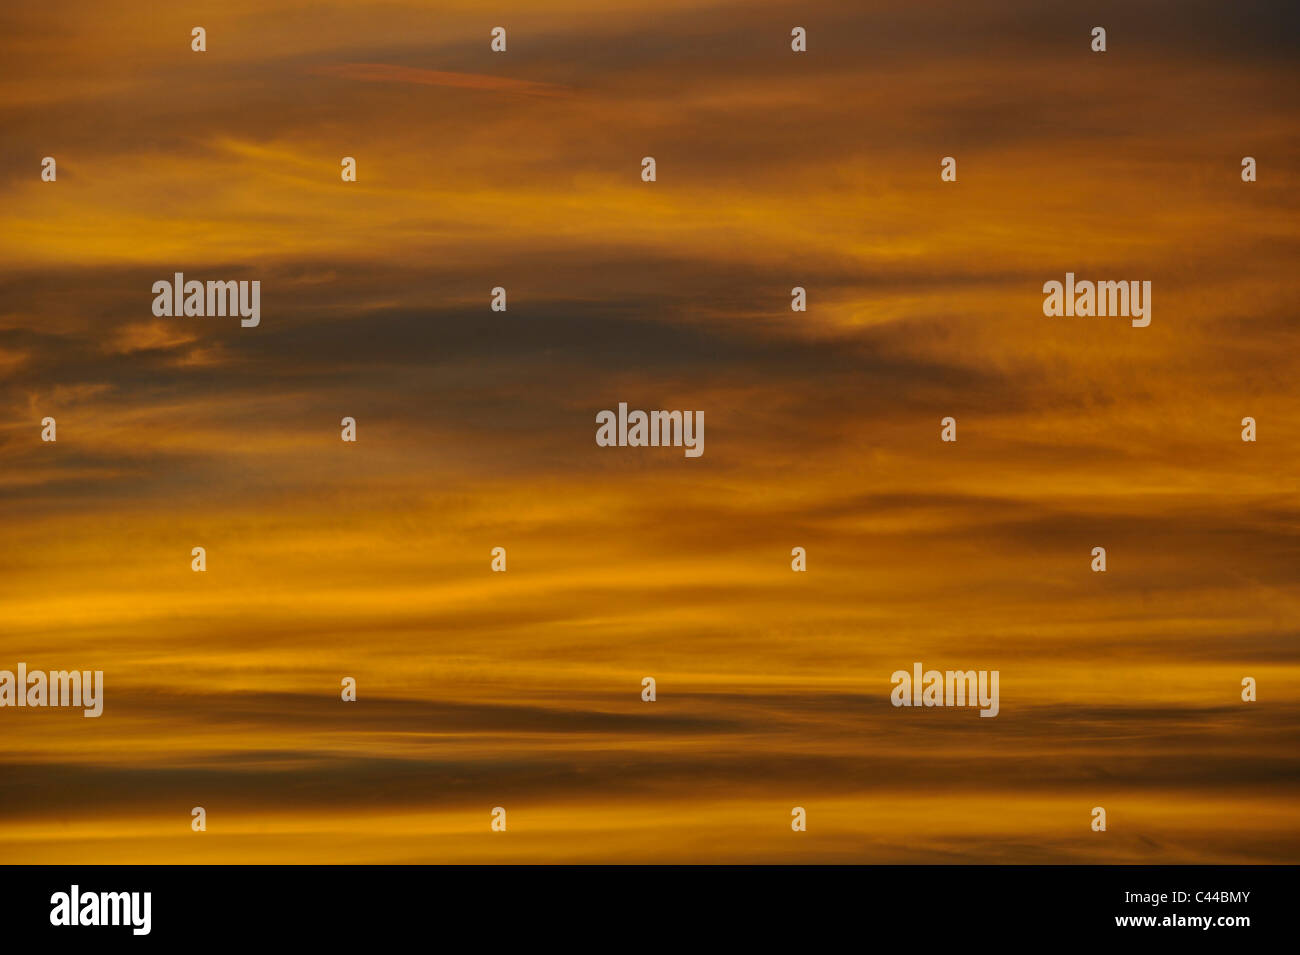 Sky, clouds, evening mood, yellow, in the evening, Stock Photo